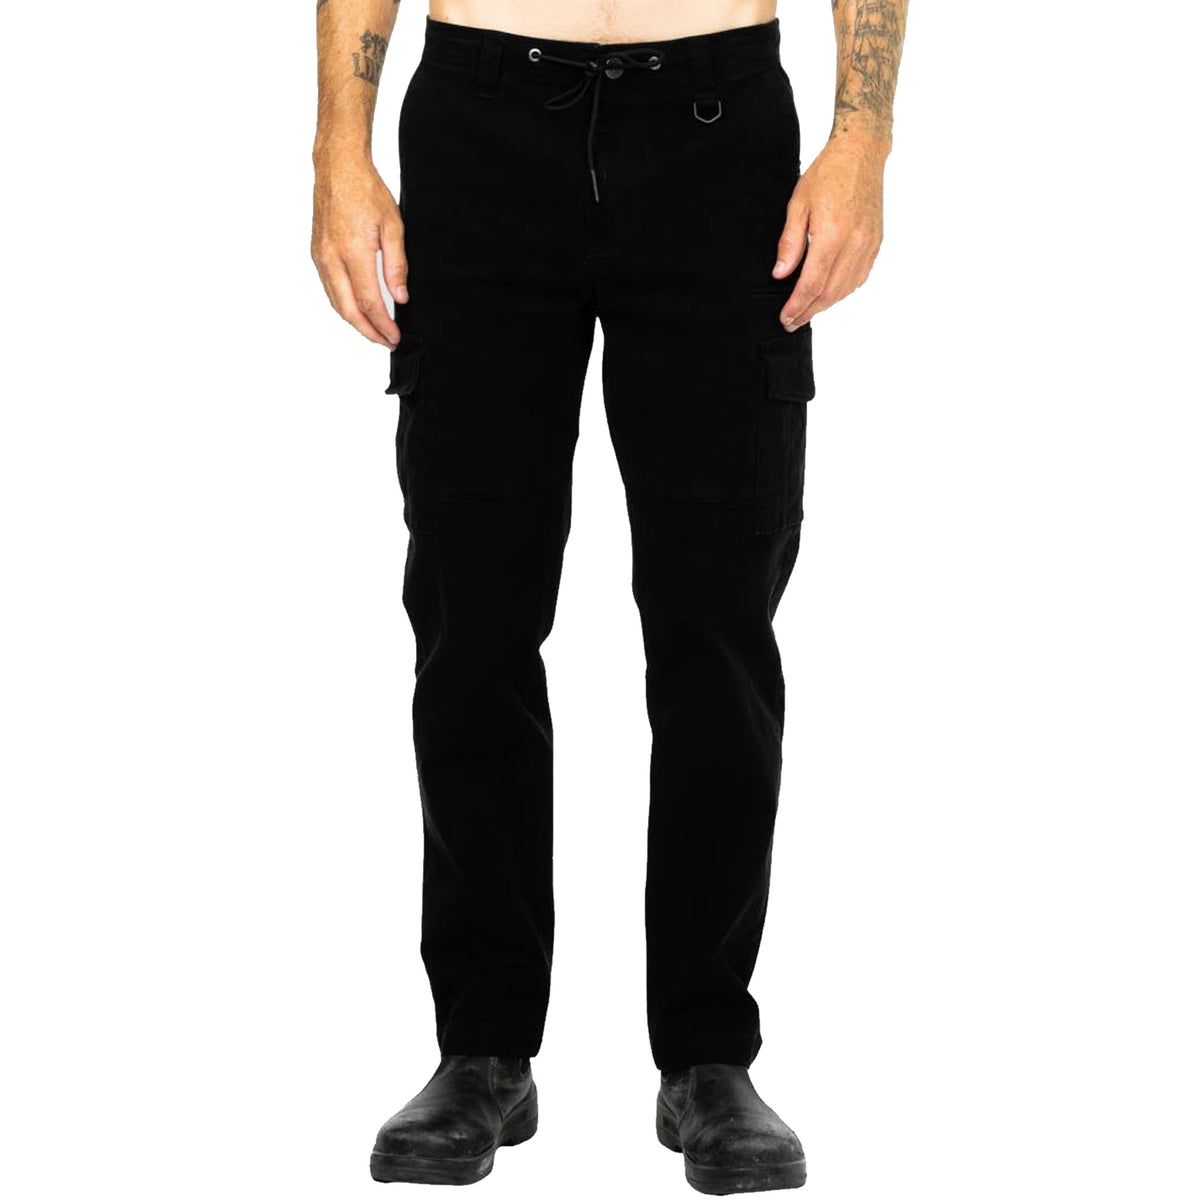 rusty obligation cargo pant in black